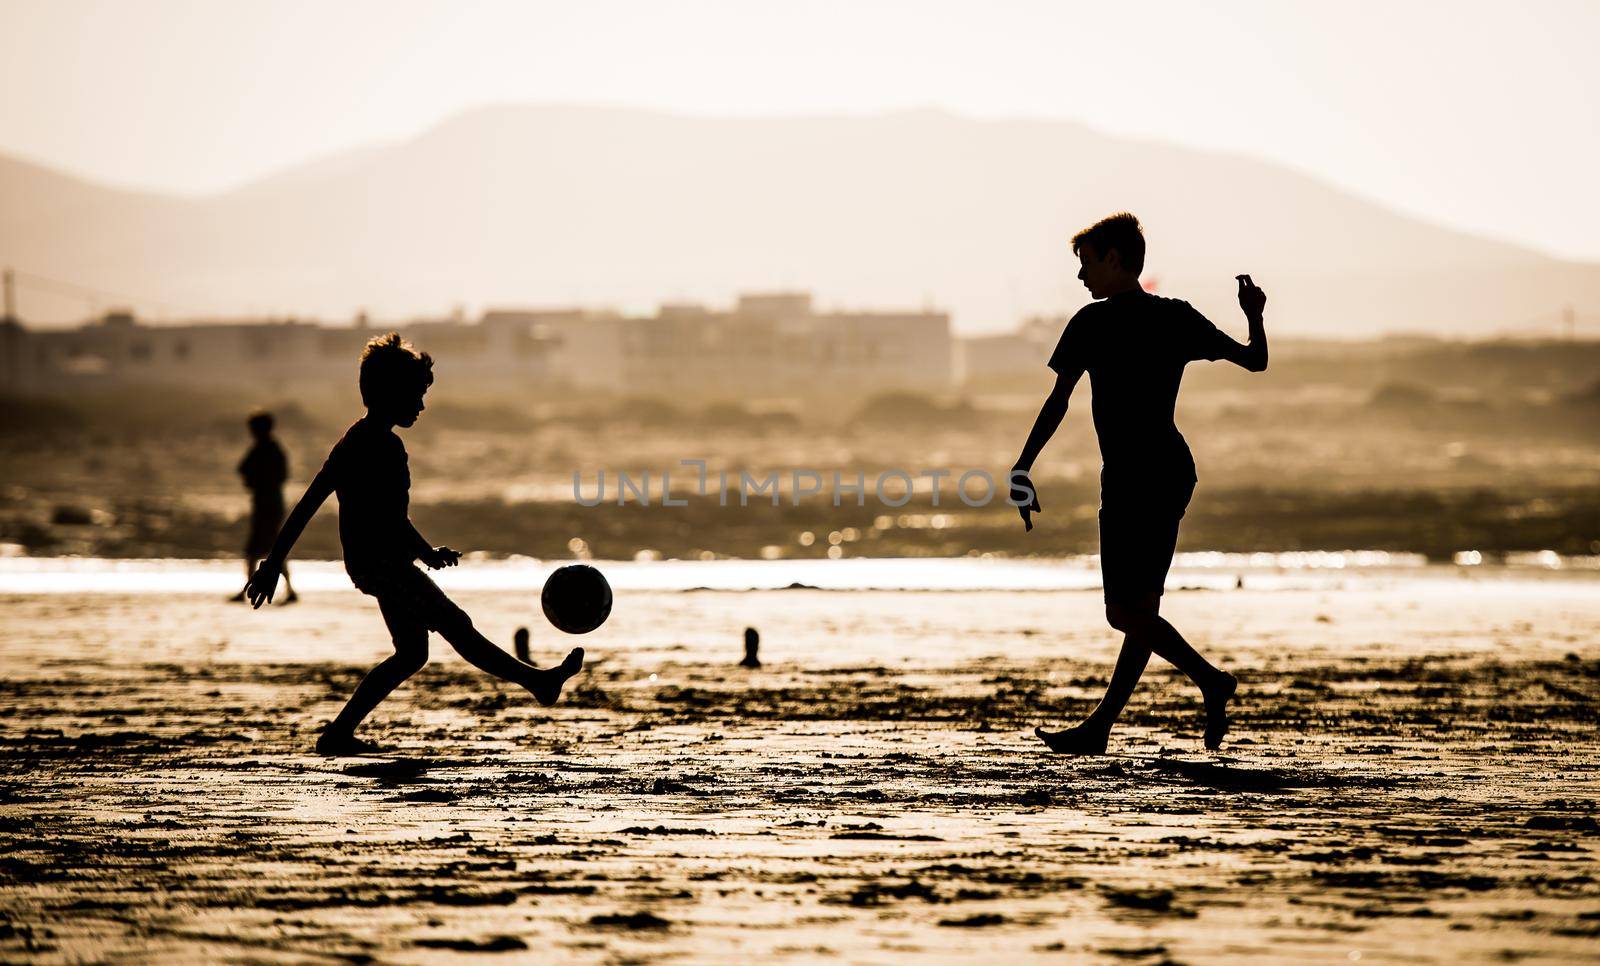 Silhouette of children on the beach with a ball